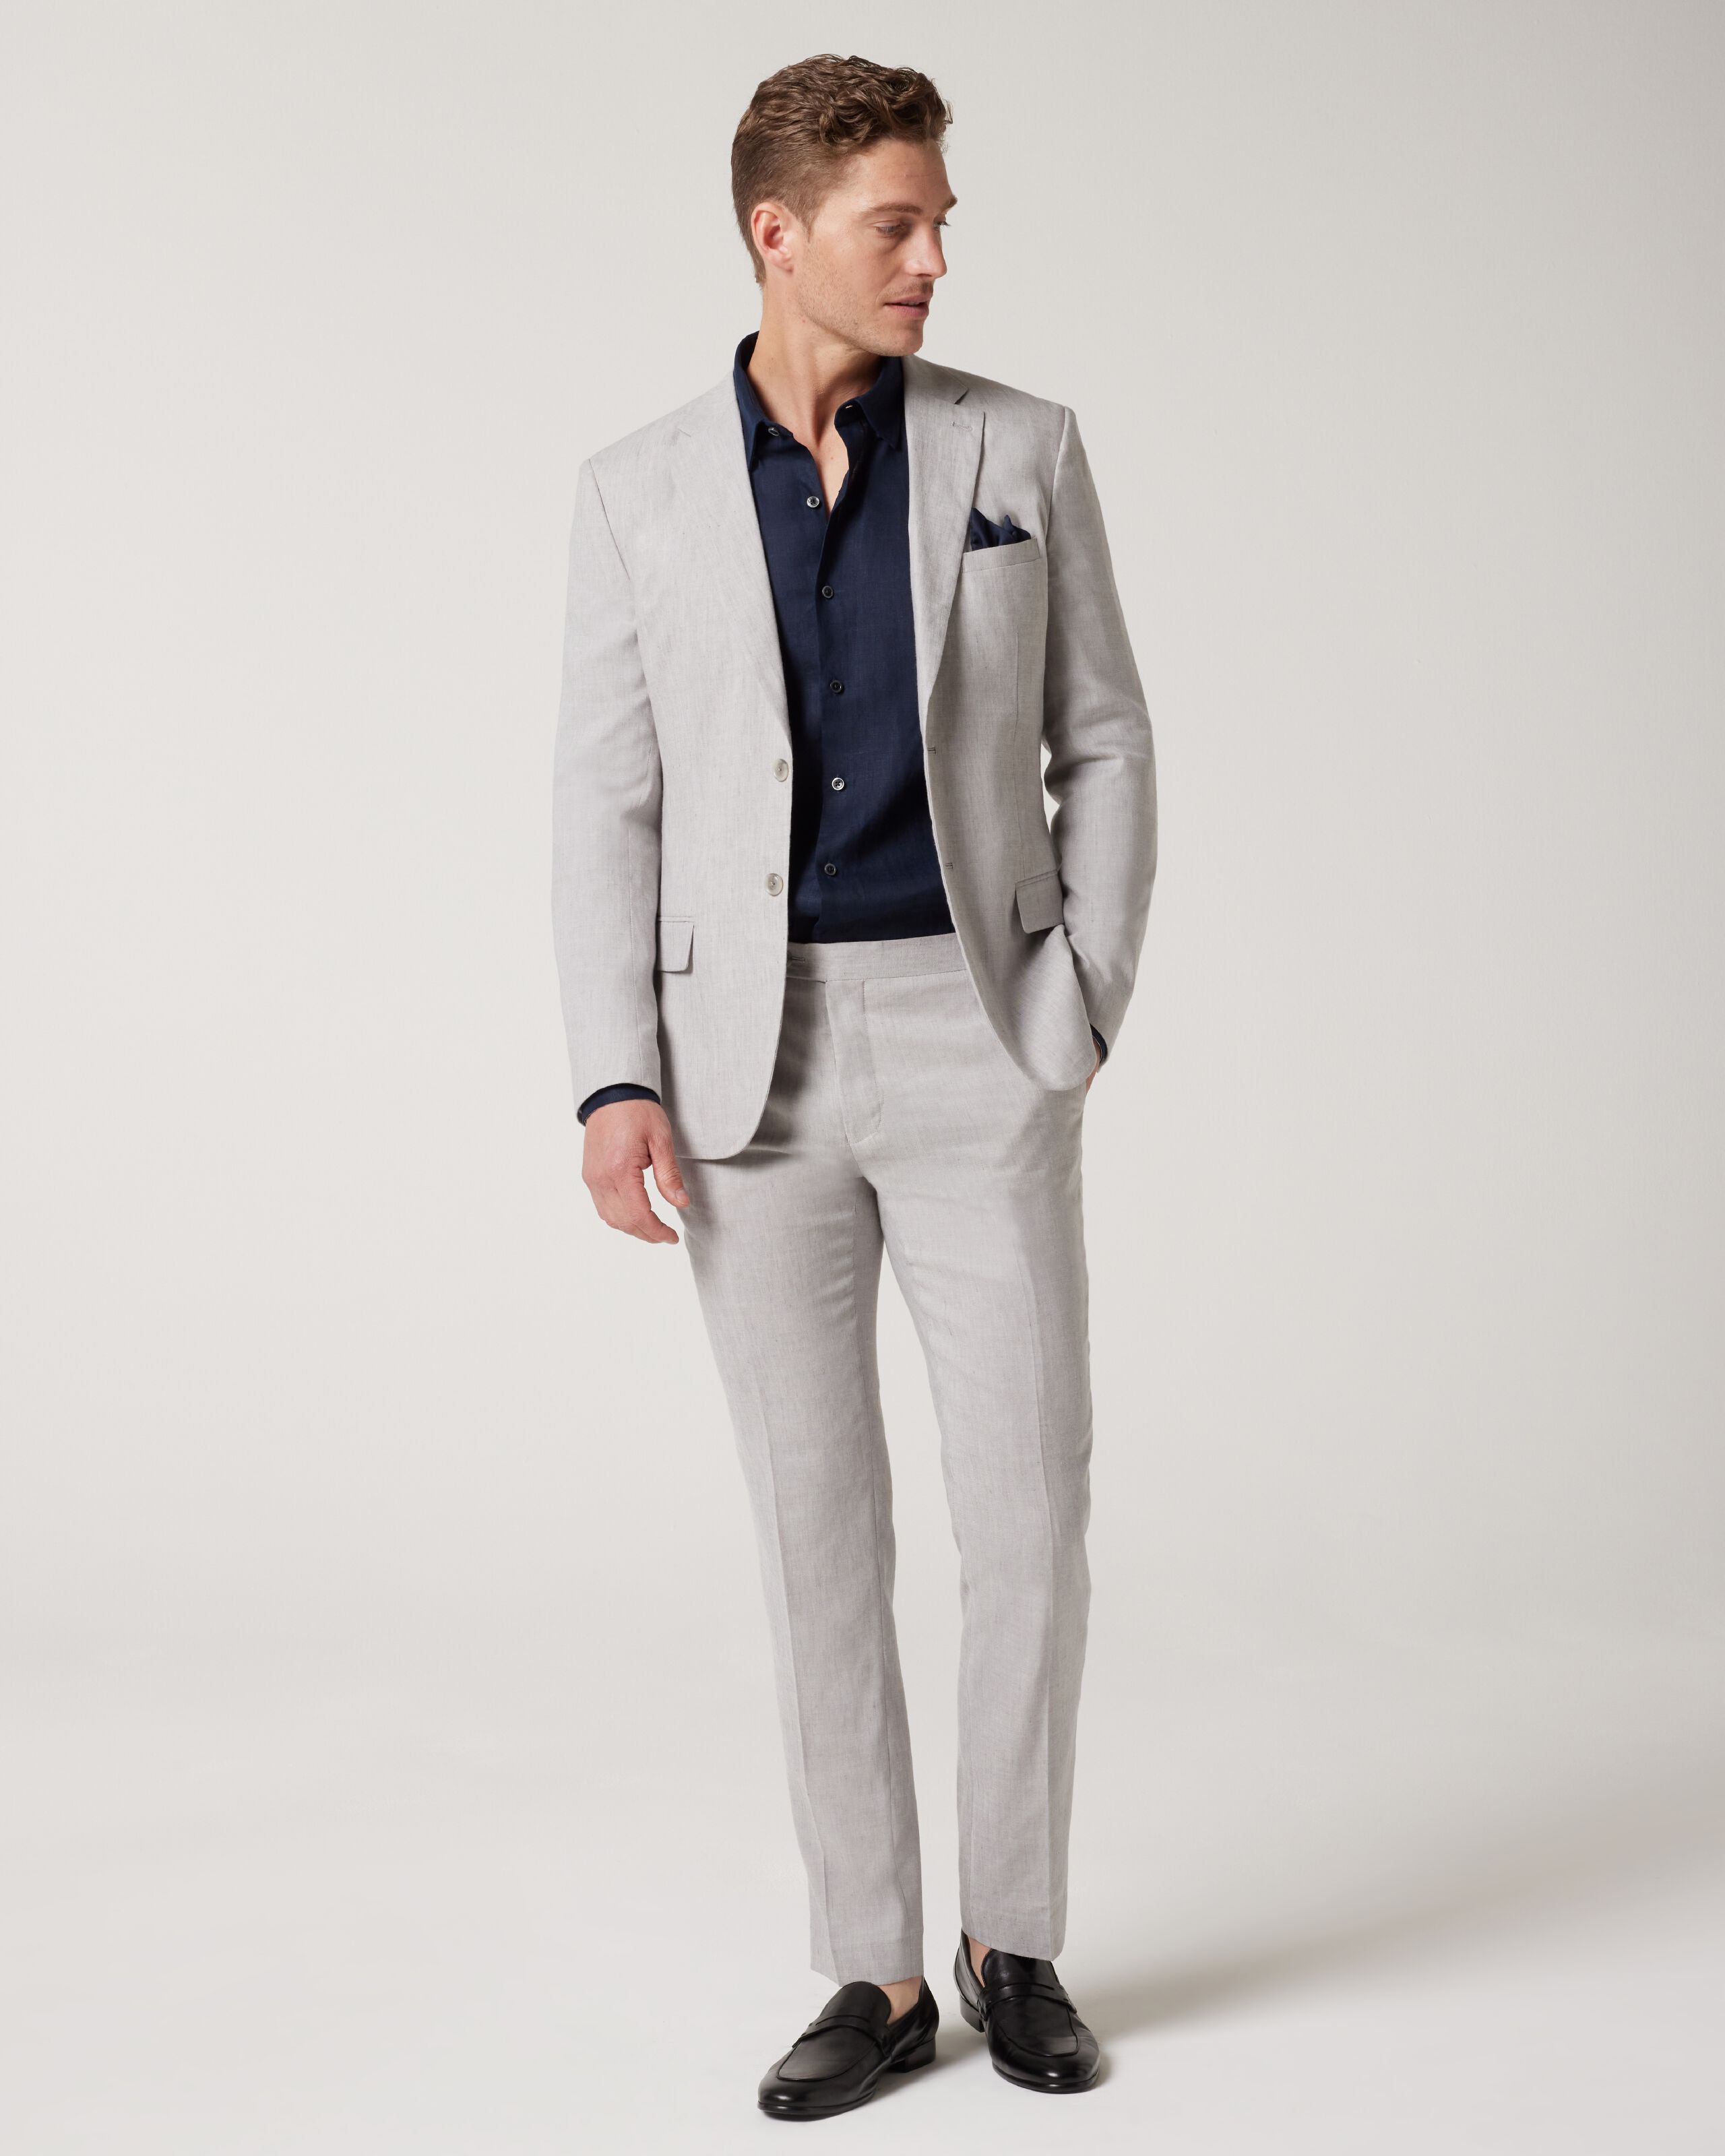 French Connection Slim Fit Grey Suit, 47% OFF